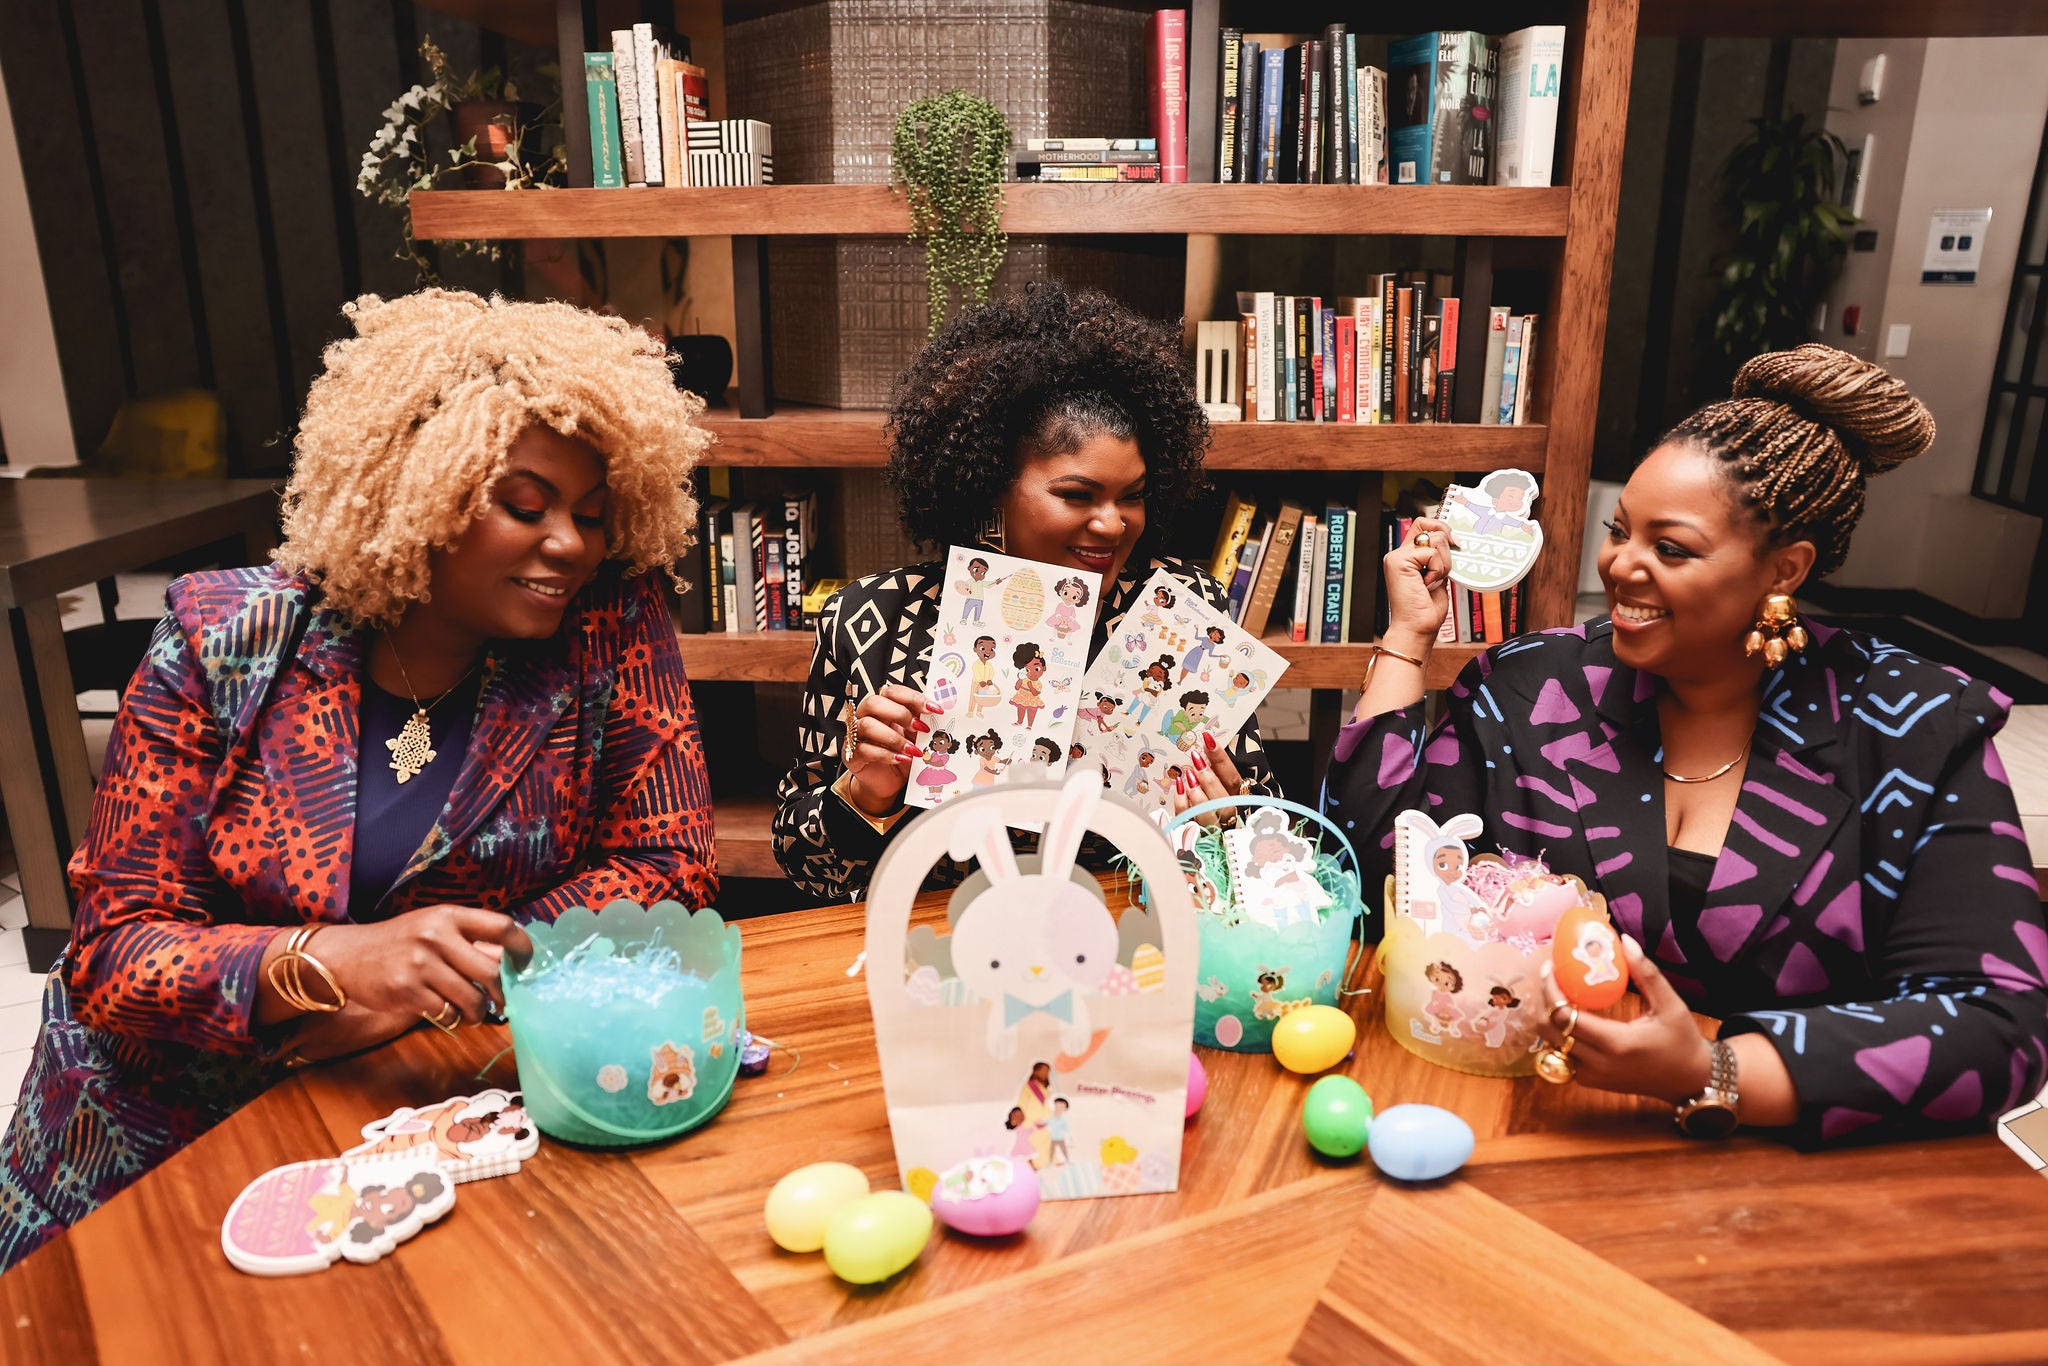 "Three women sitting around a table, smiling and engaging with each other, surrounded by colorful party supplies and decorations from Black Paper Party. They are examining products and appear to be having a joyful time. The atmosphere is lively and celebrates cultural diversity.